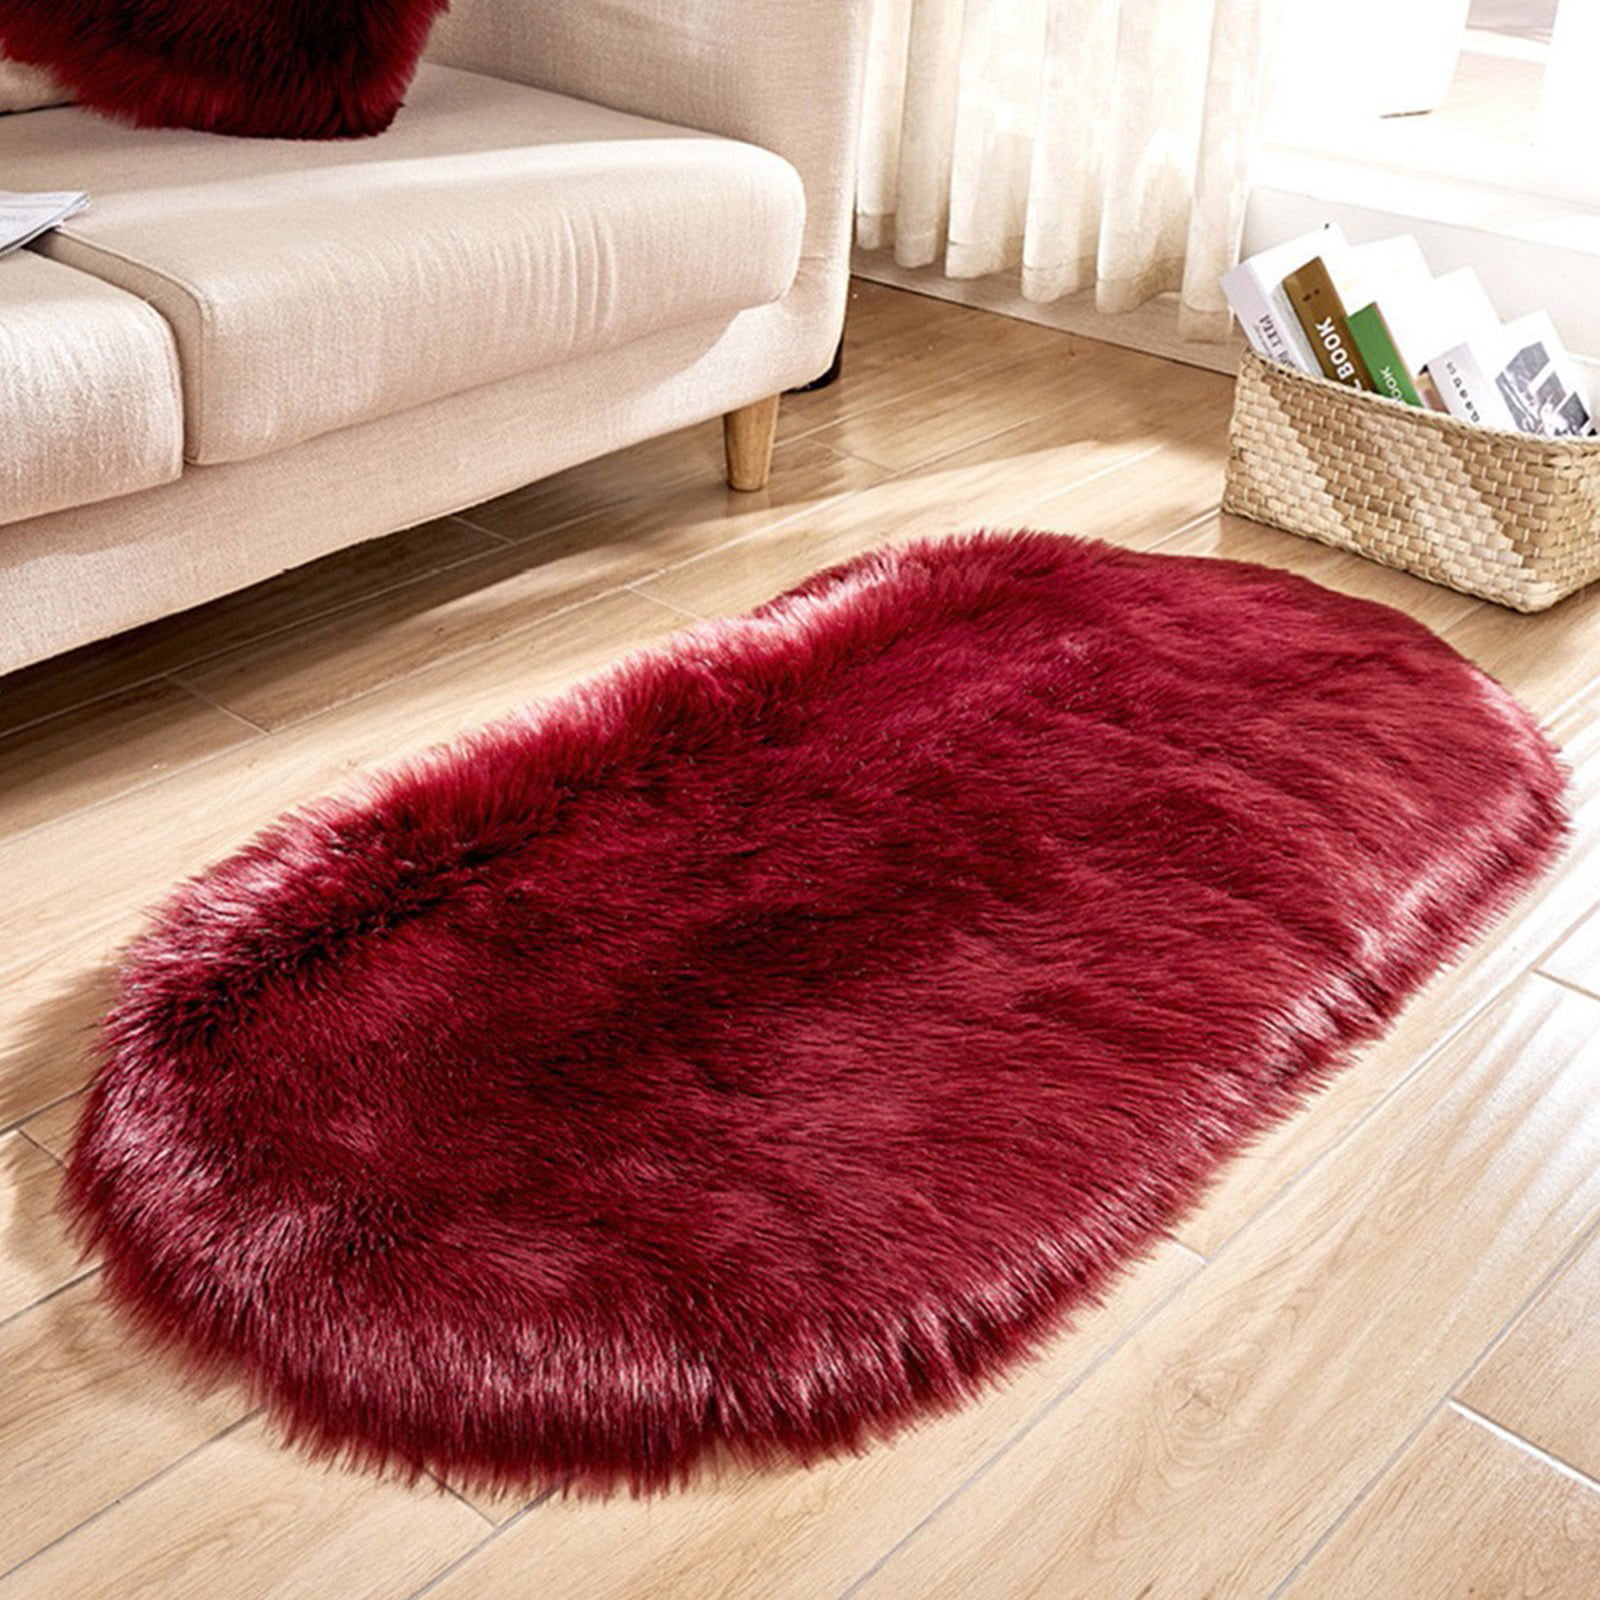 New Soft Rug Chair Cover Artificial Wool Warm Hairy Carpet Seat Home Decoration 